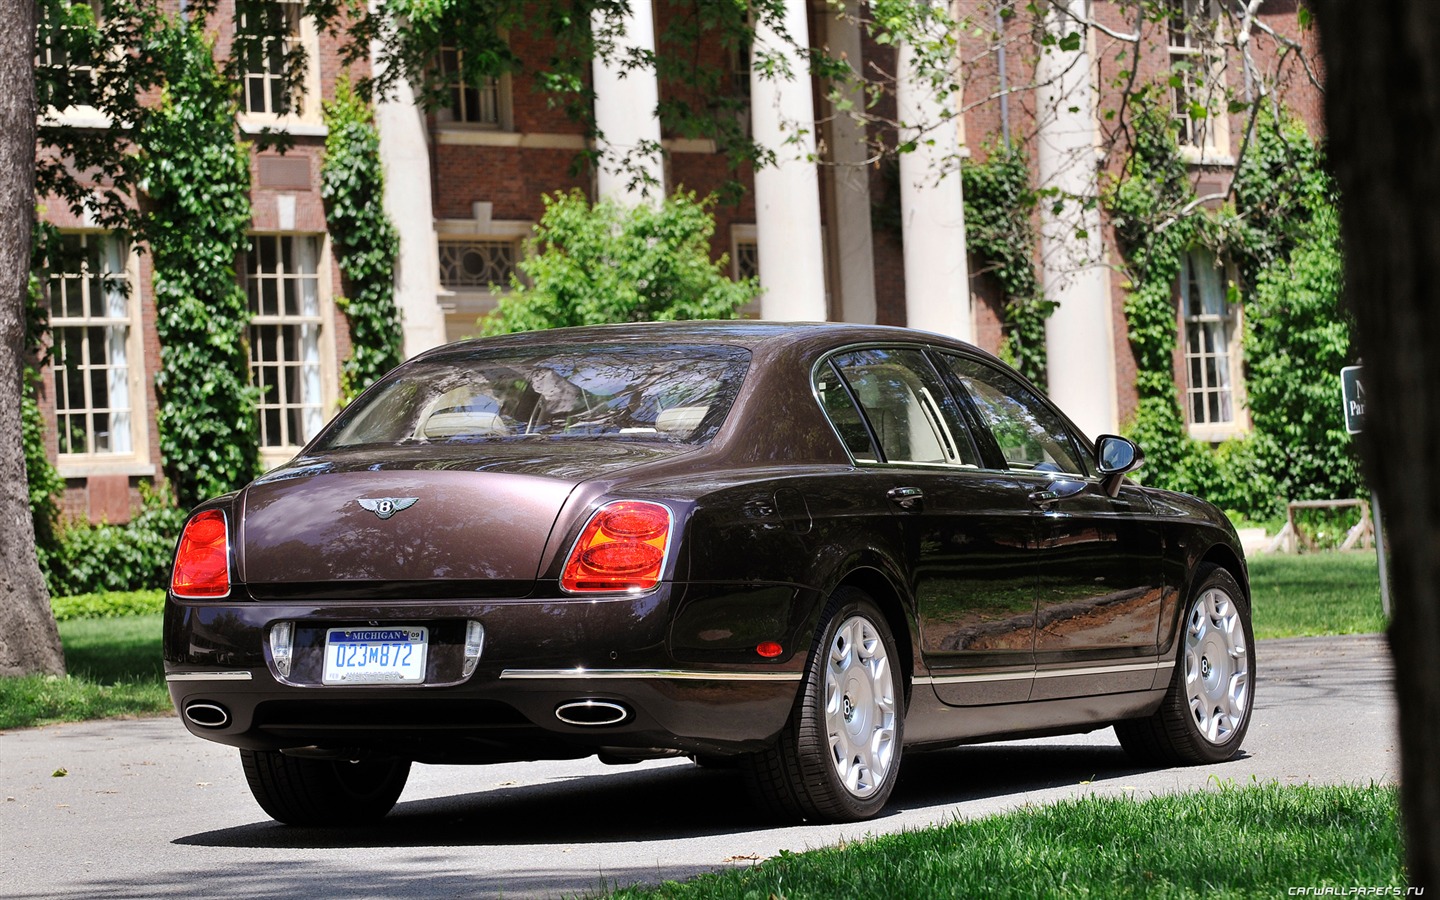 Bentley Continental Flying Spur - 2008 宾利15 - 1440x900